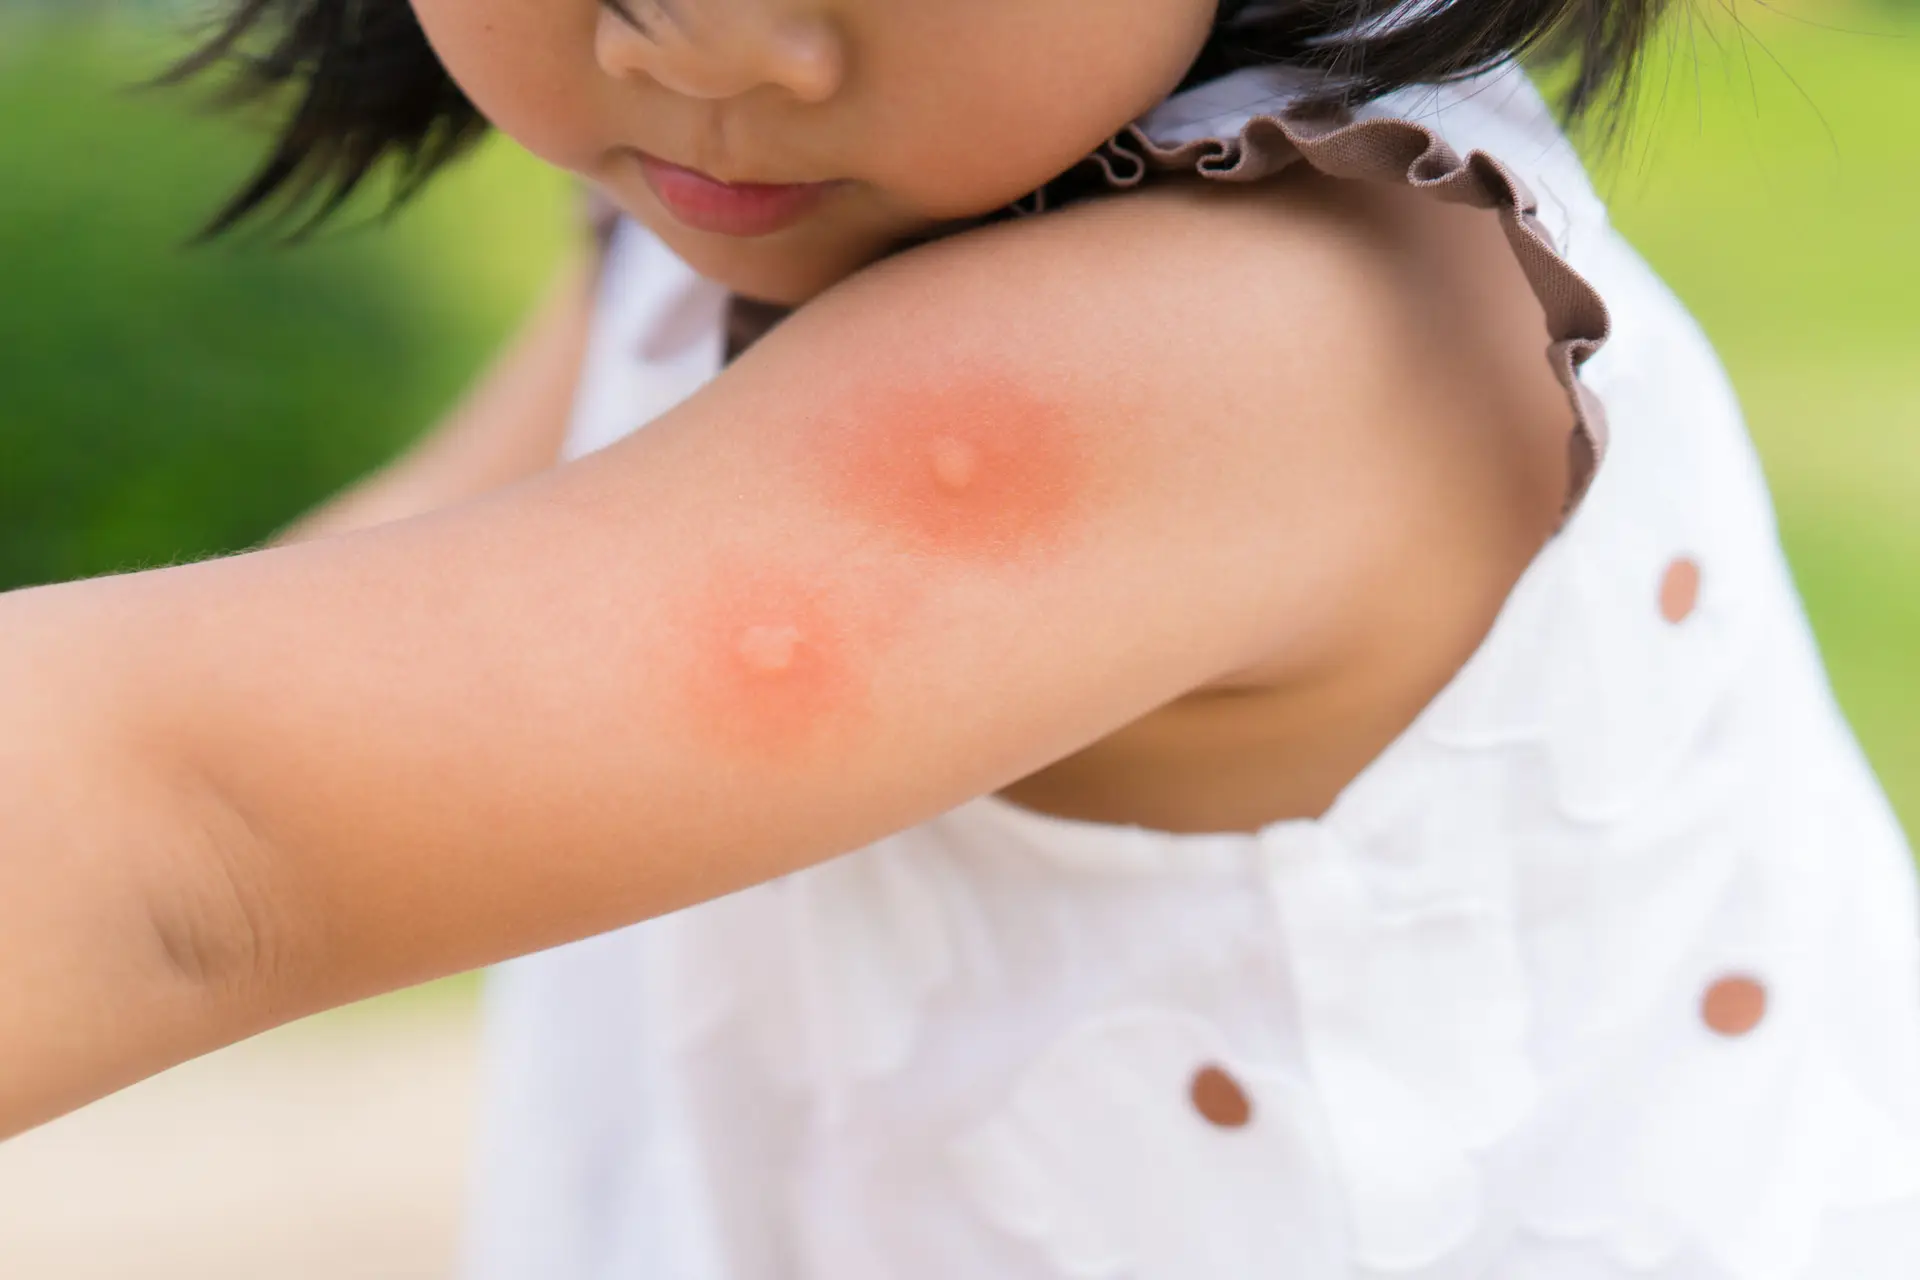 young girl with mosquito bites on her arm